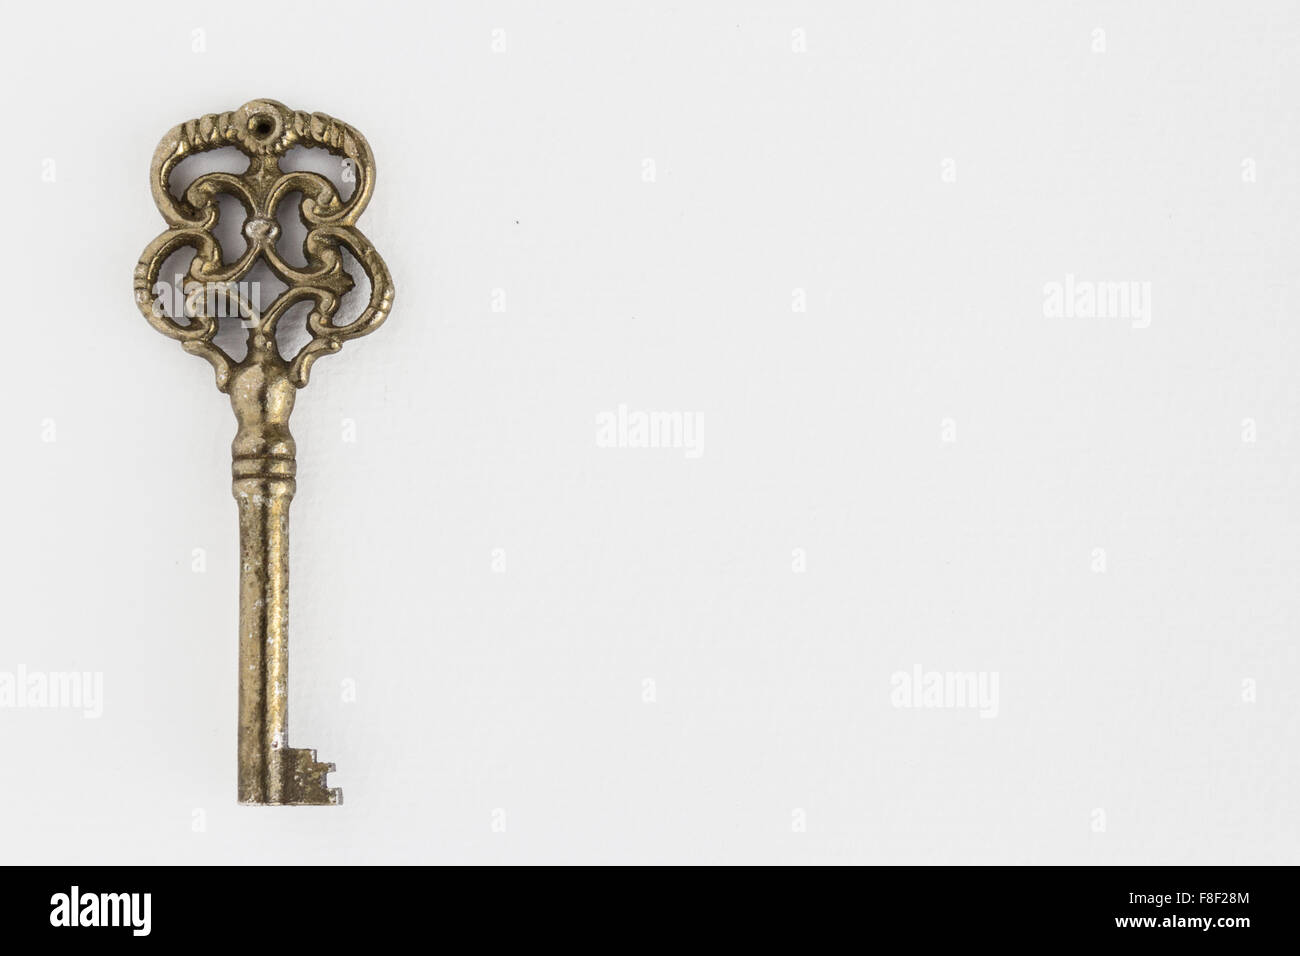 old ornate key on white background with copy space Stock Photo